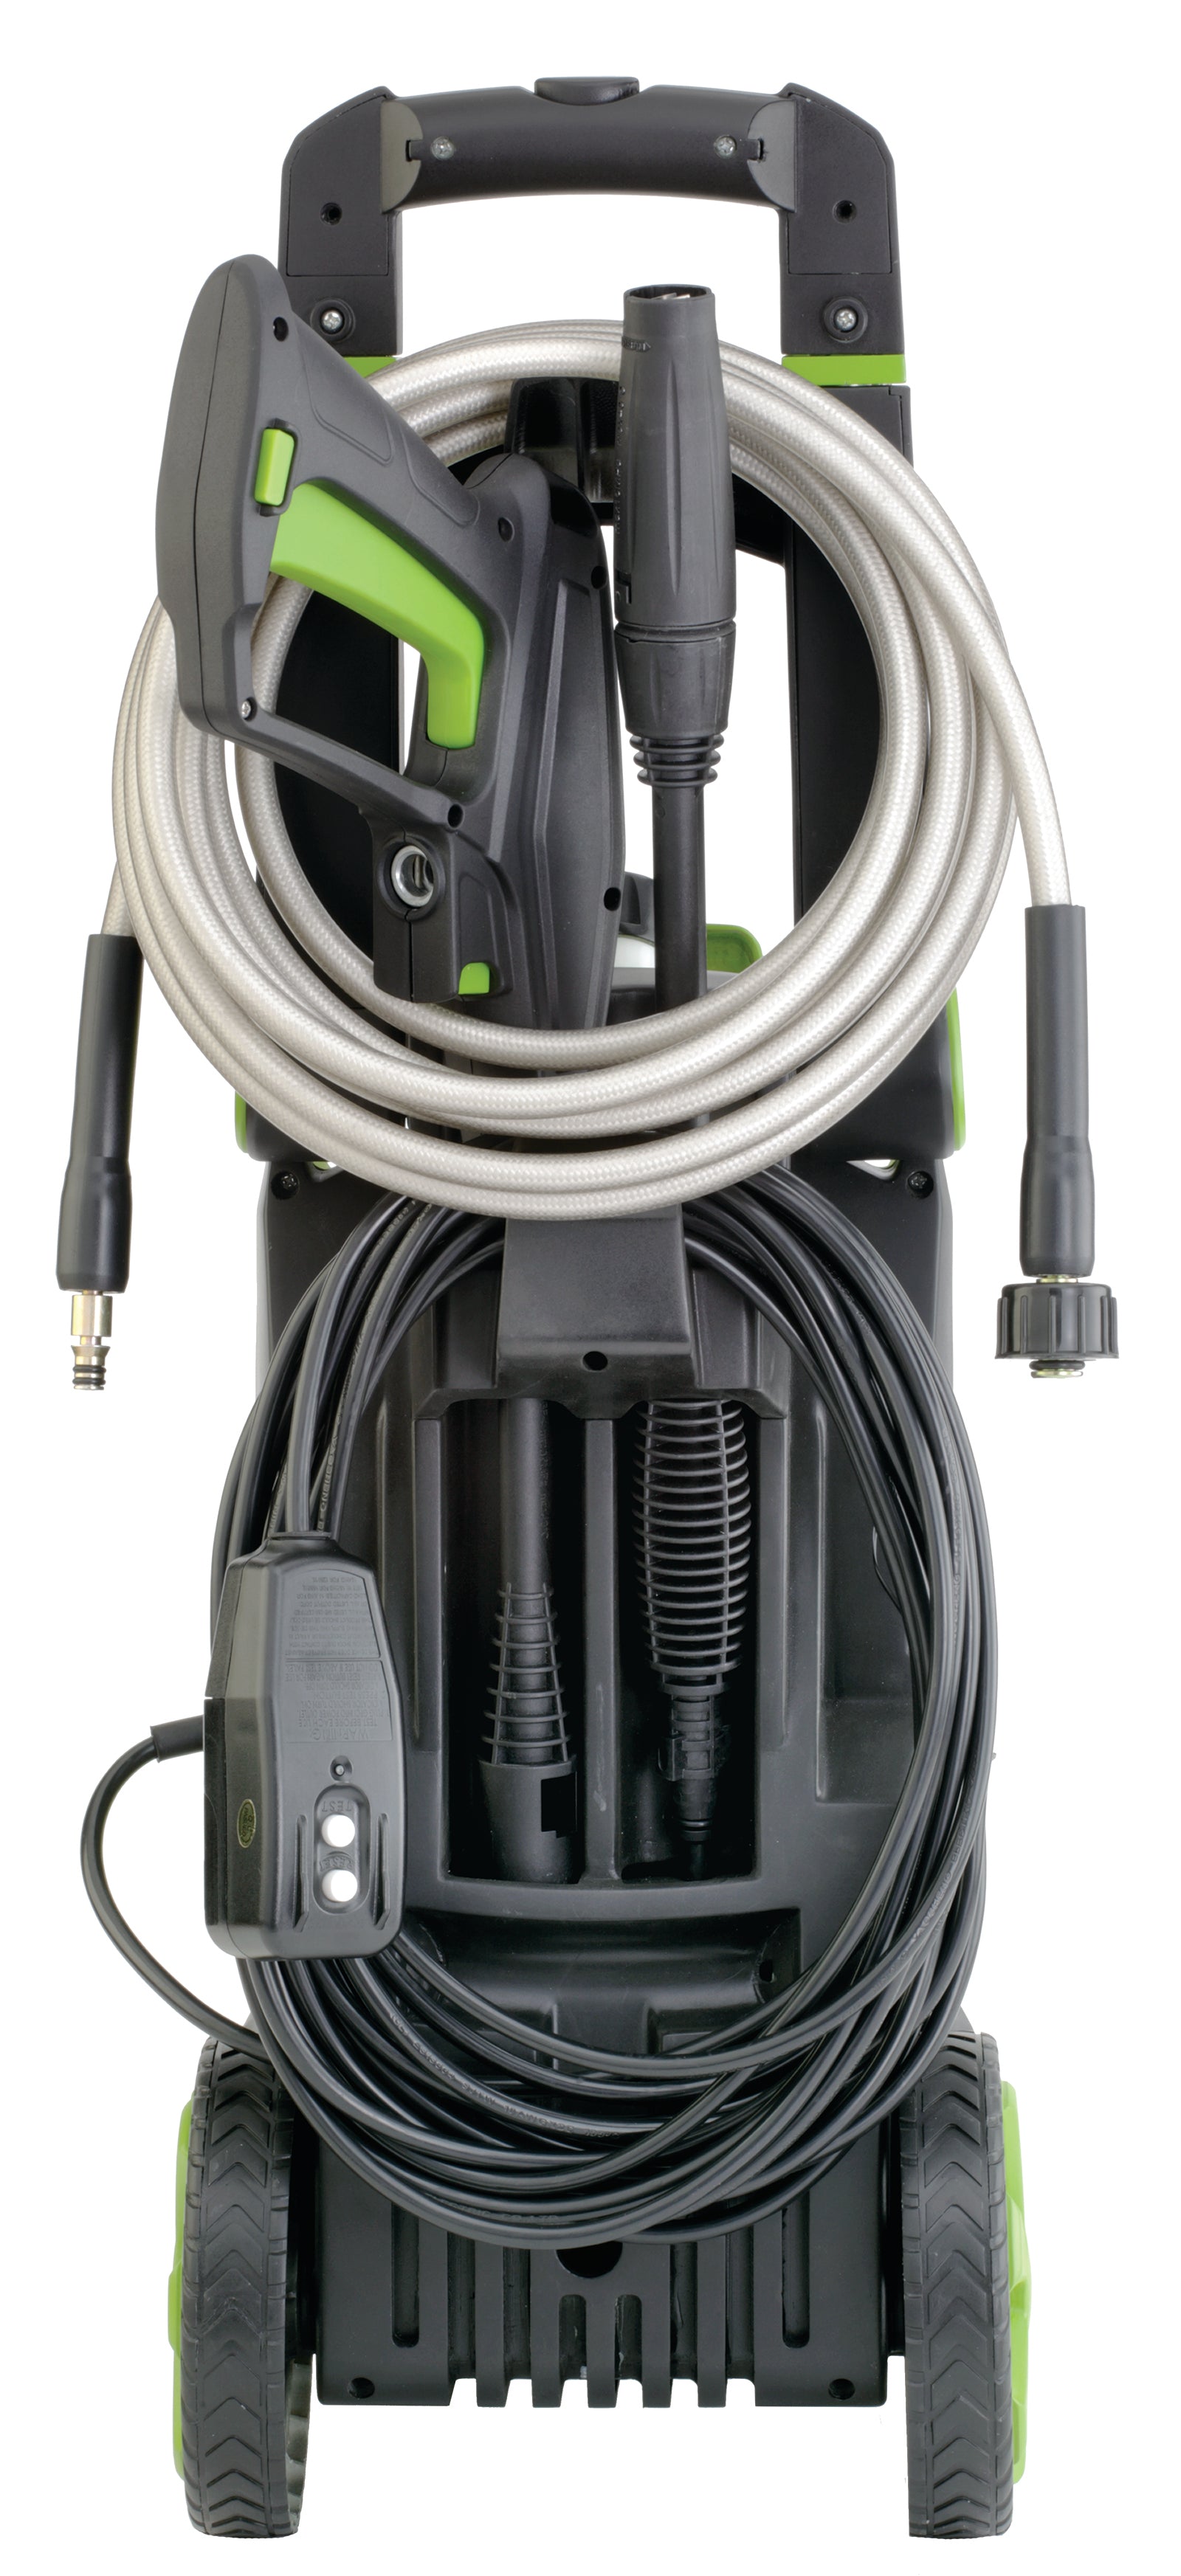 Earthwise Power Tools by ALM 1650 PSI 12.5-Amp 120V Corded Pressure Washer